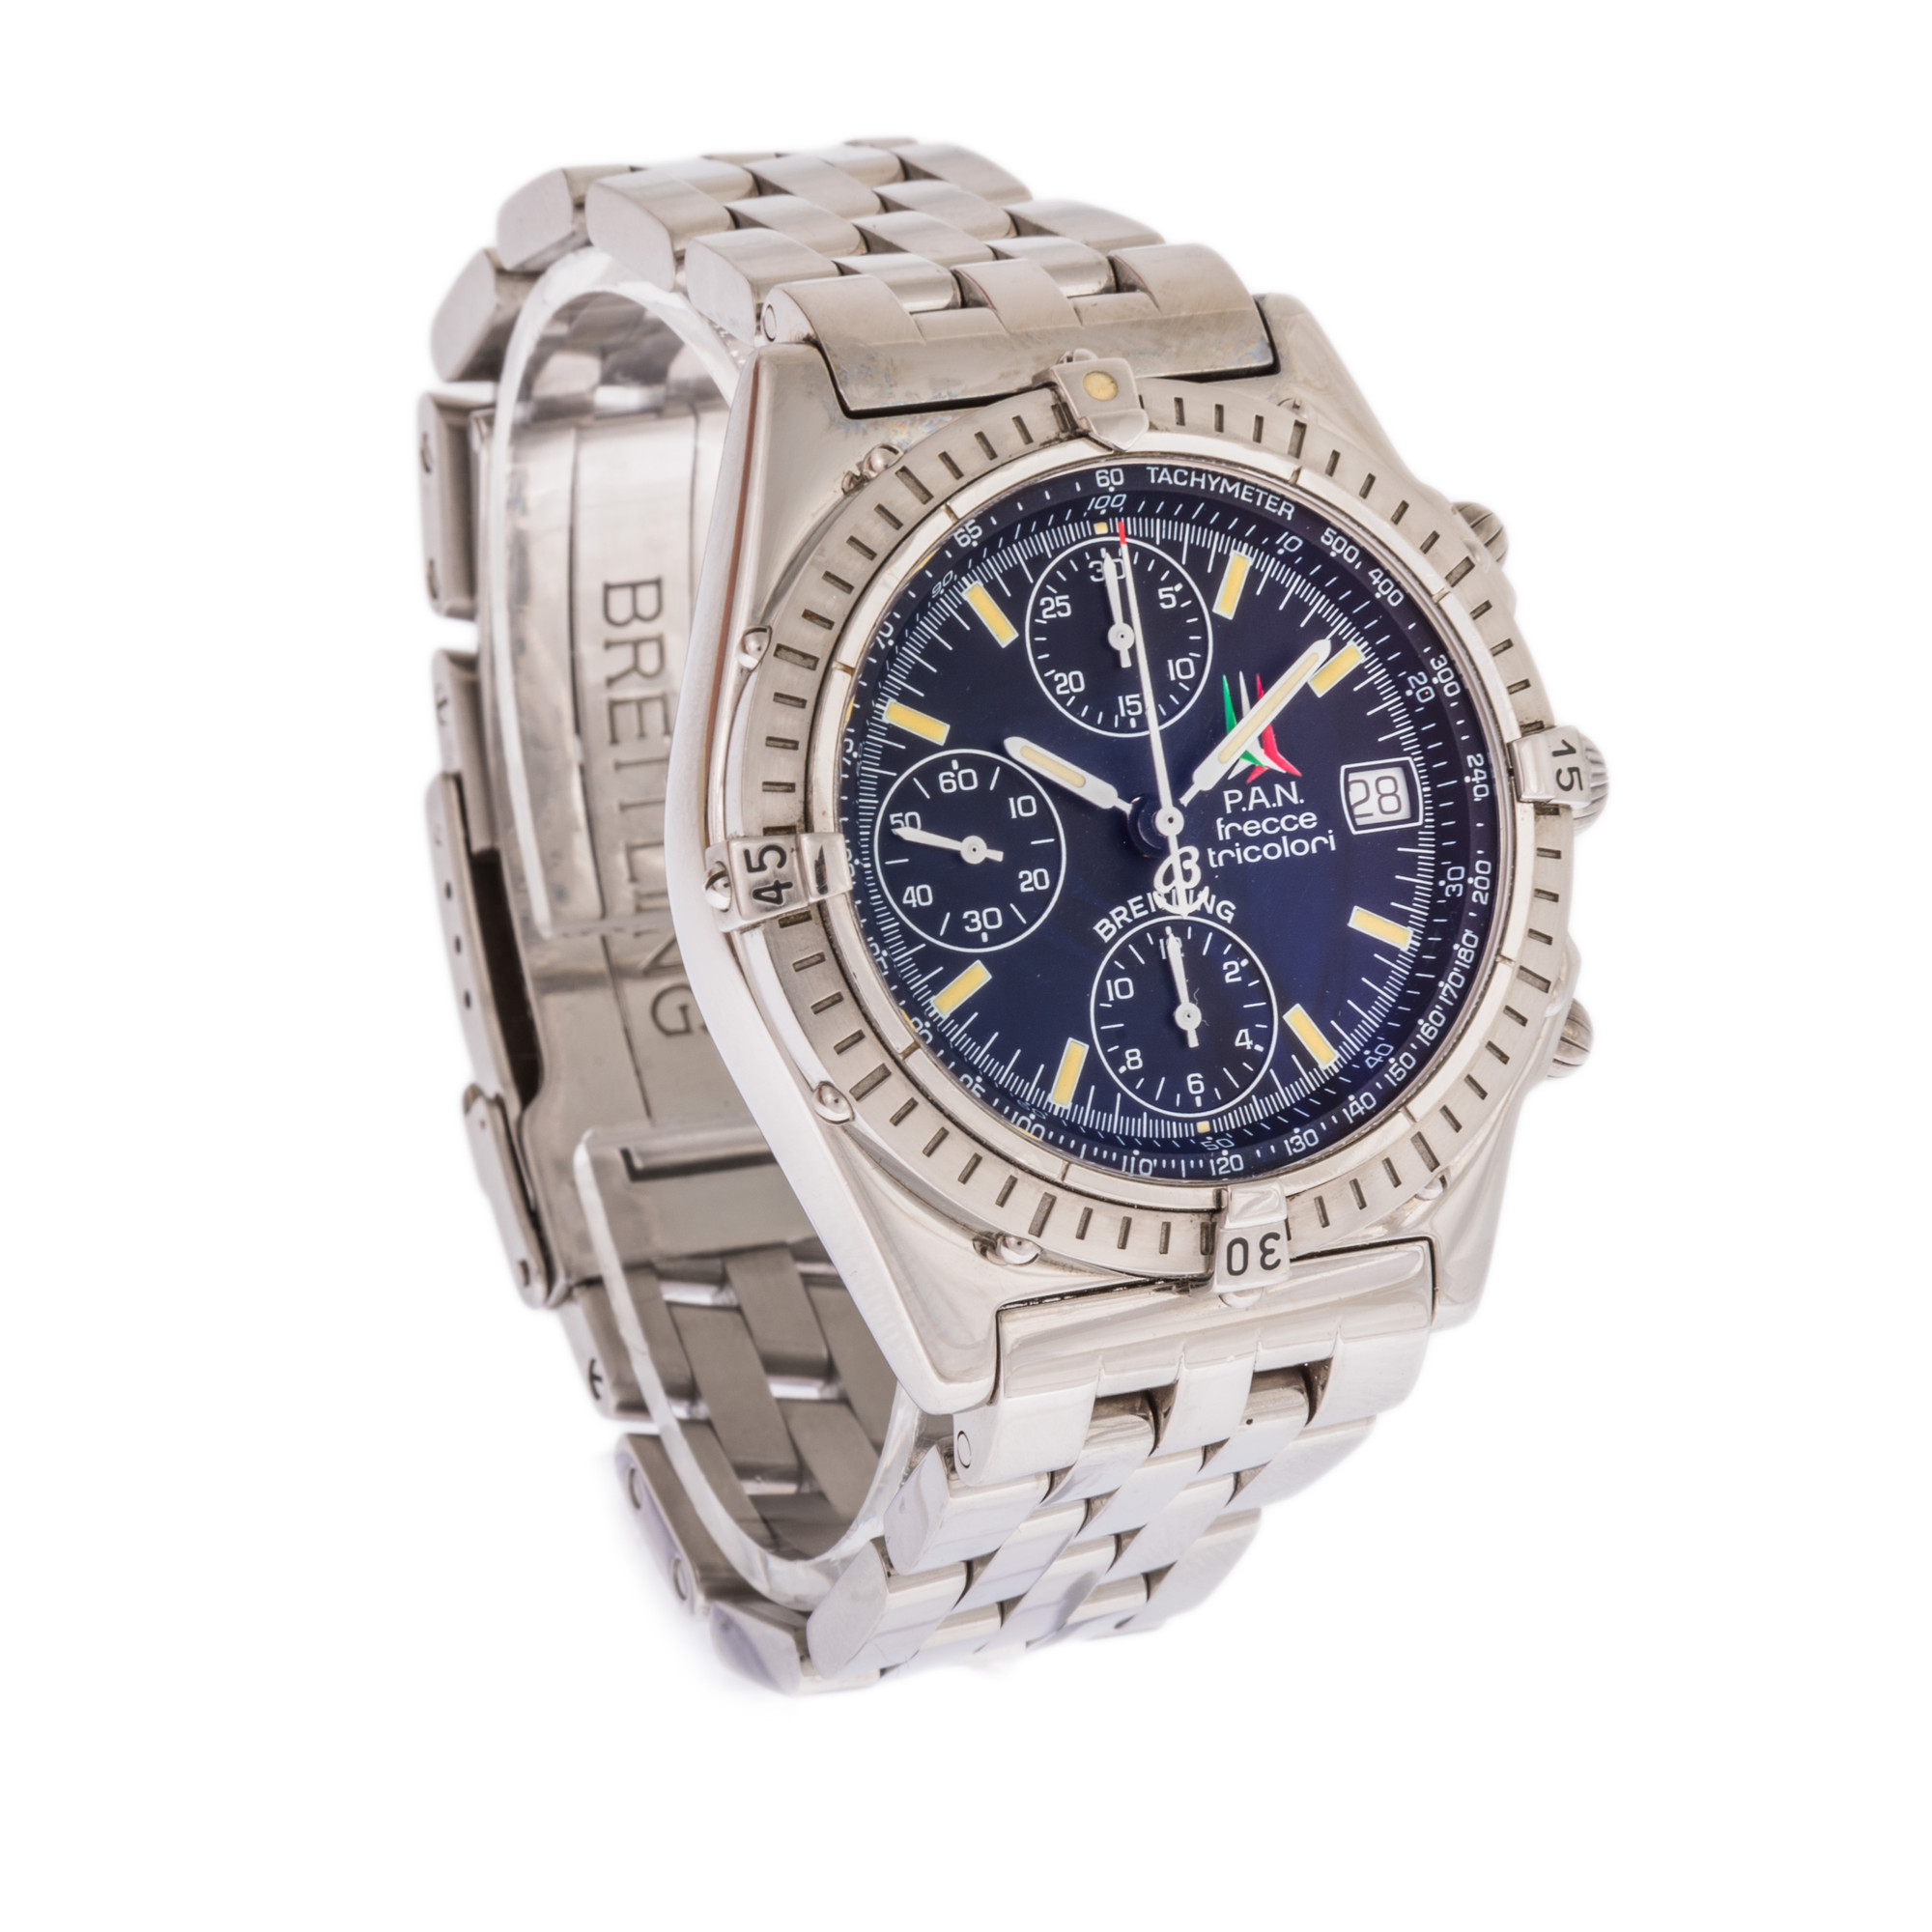 Breitling Chronomat PAN Frecce Tricolori A13050.1 *Limited Edition*